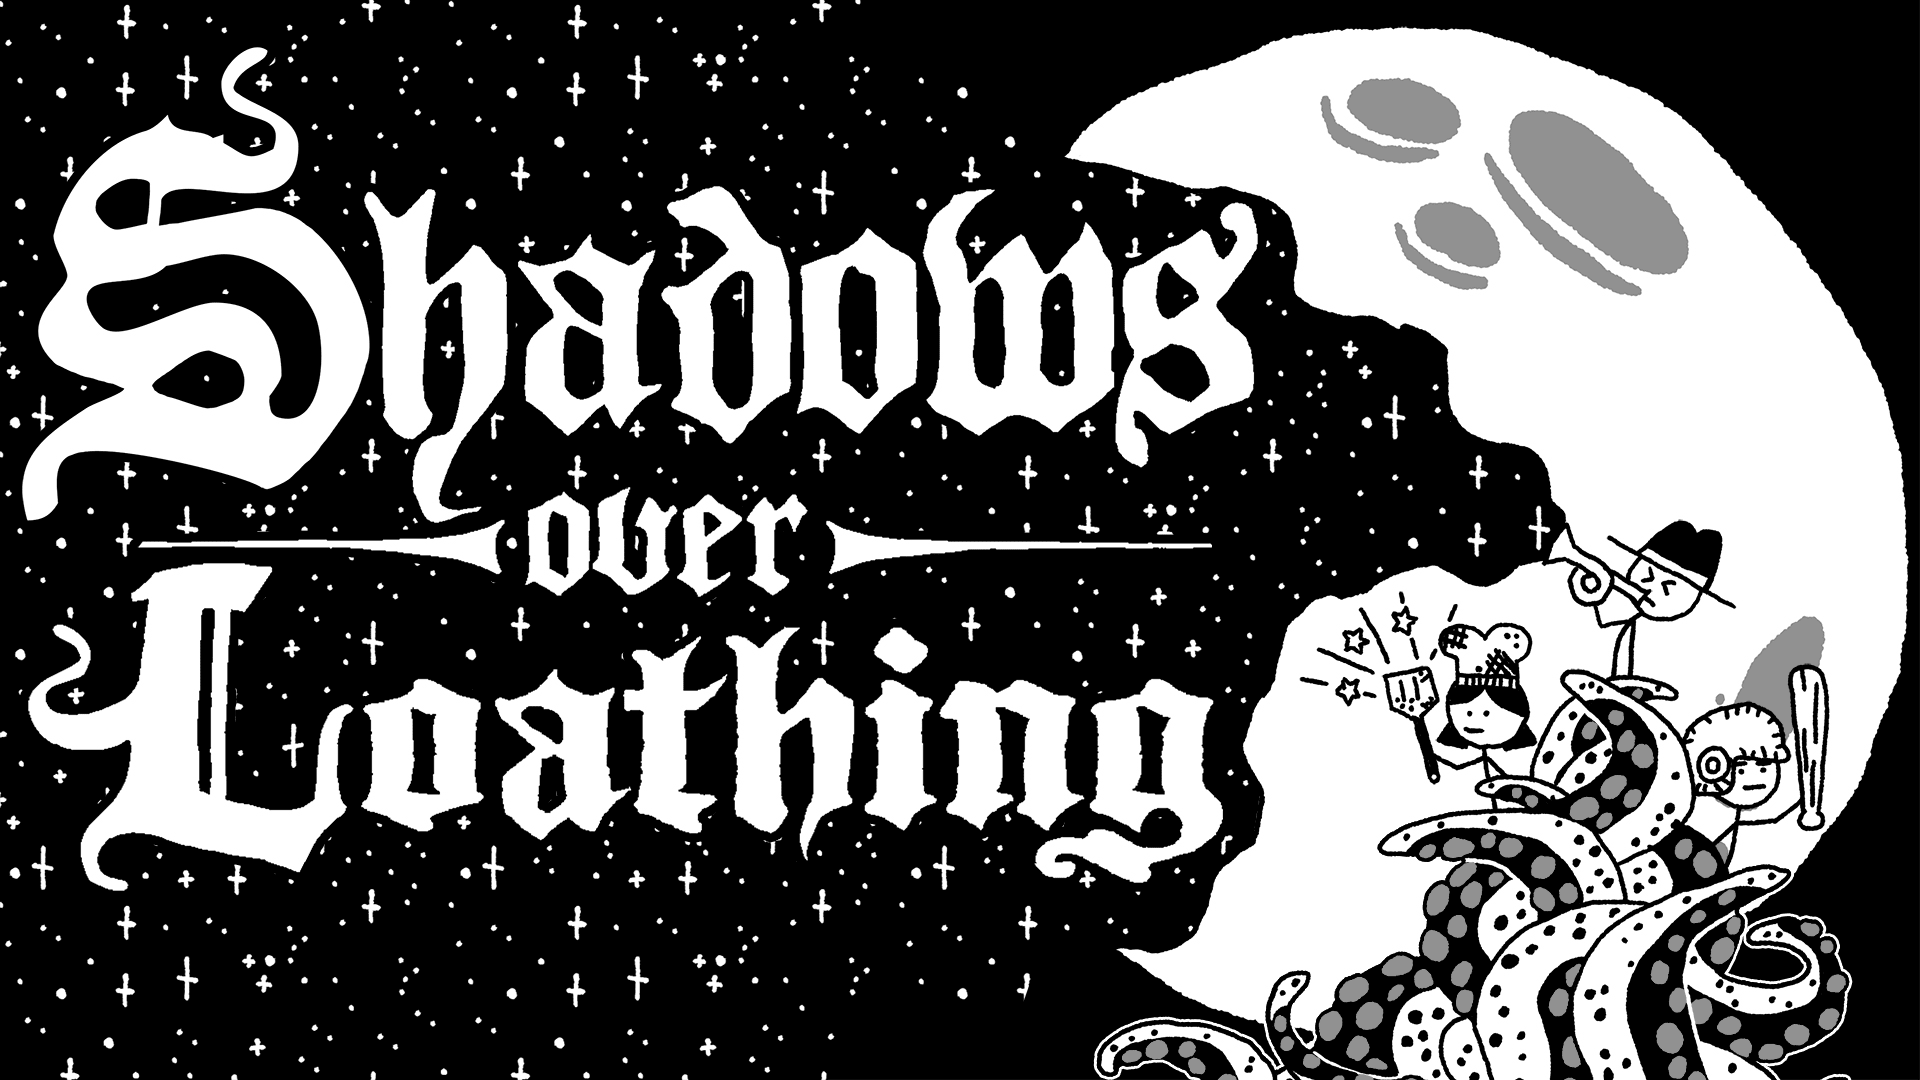 Shadows Over Loathing 1